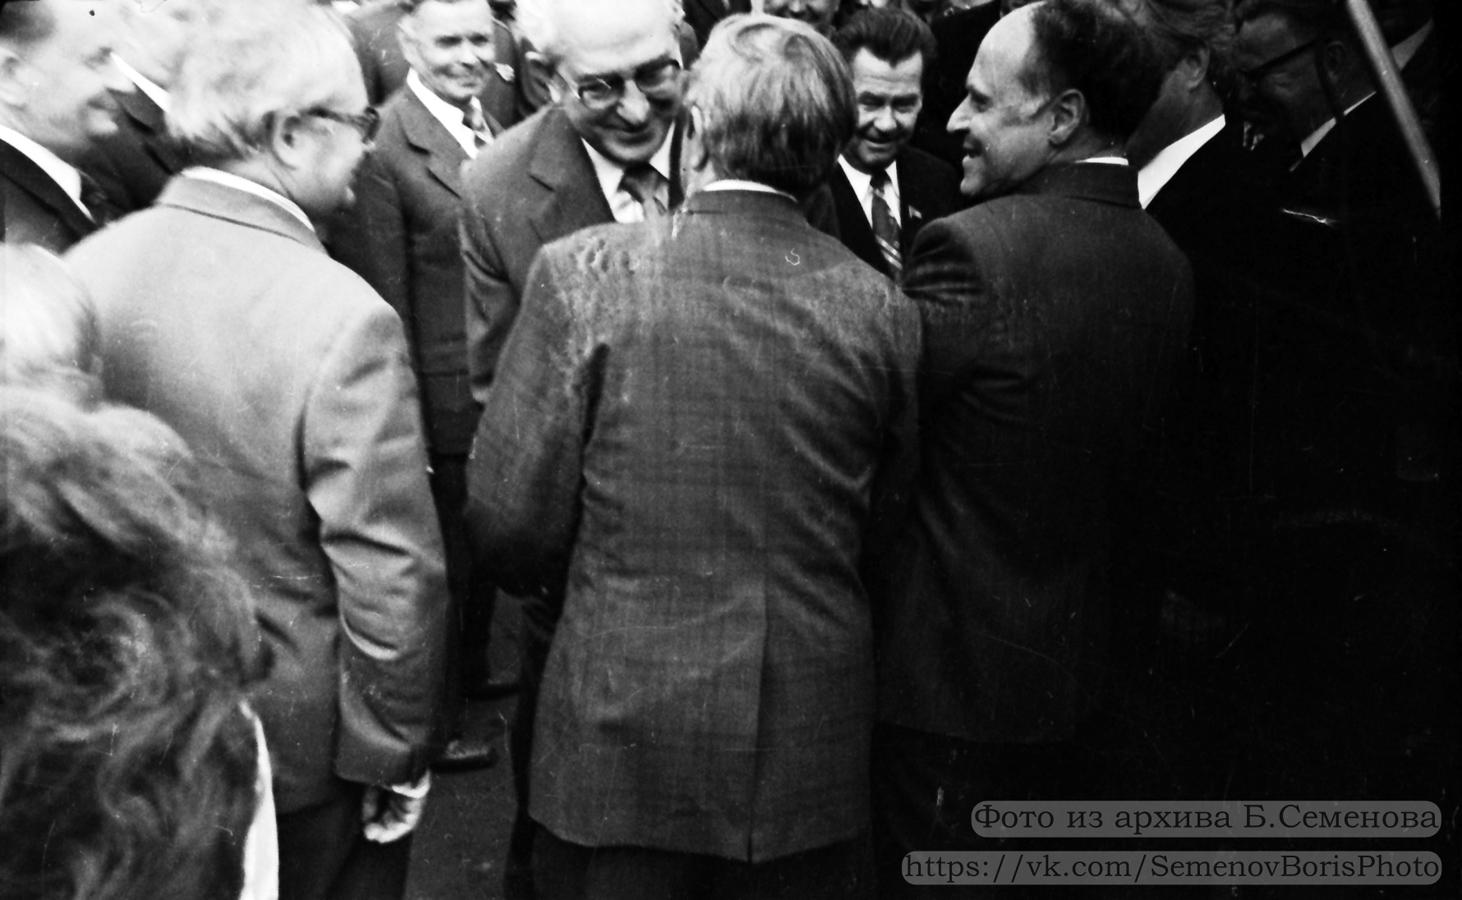 August 5, 1978. Welcome ceremony of comrade Yuri Andropov in the Petrozavodsk railway station